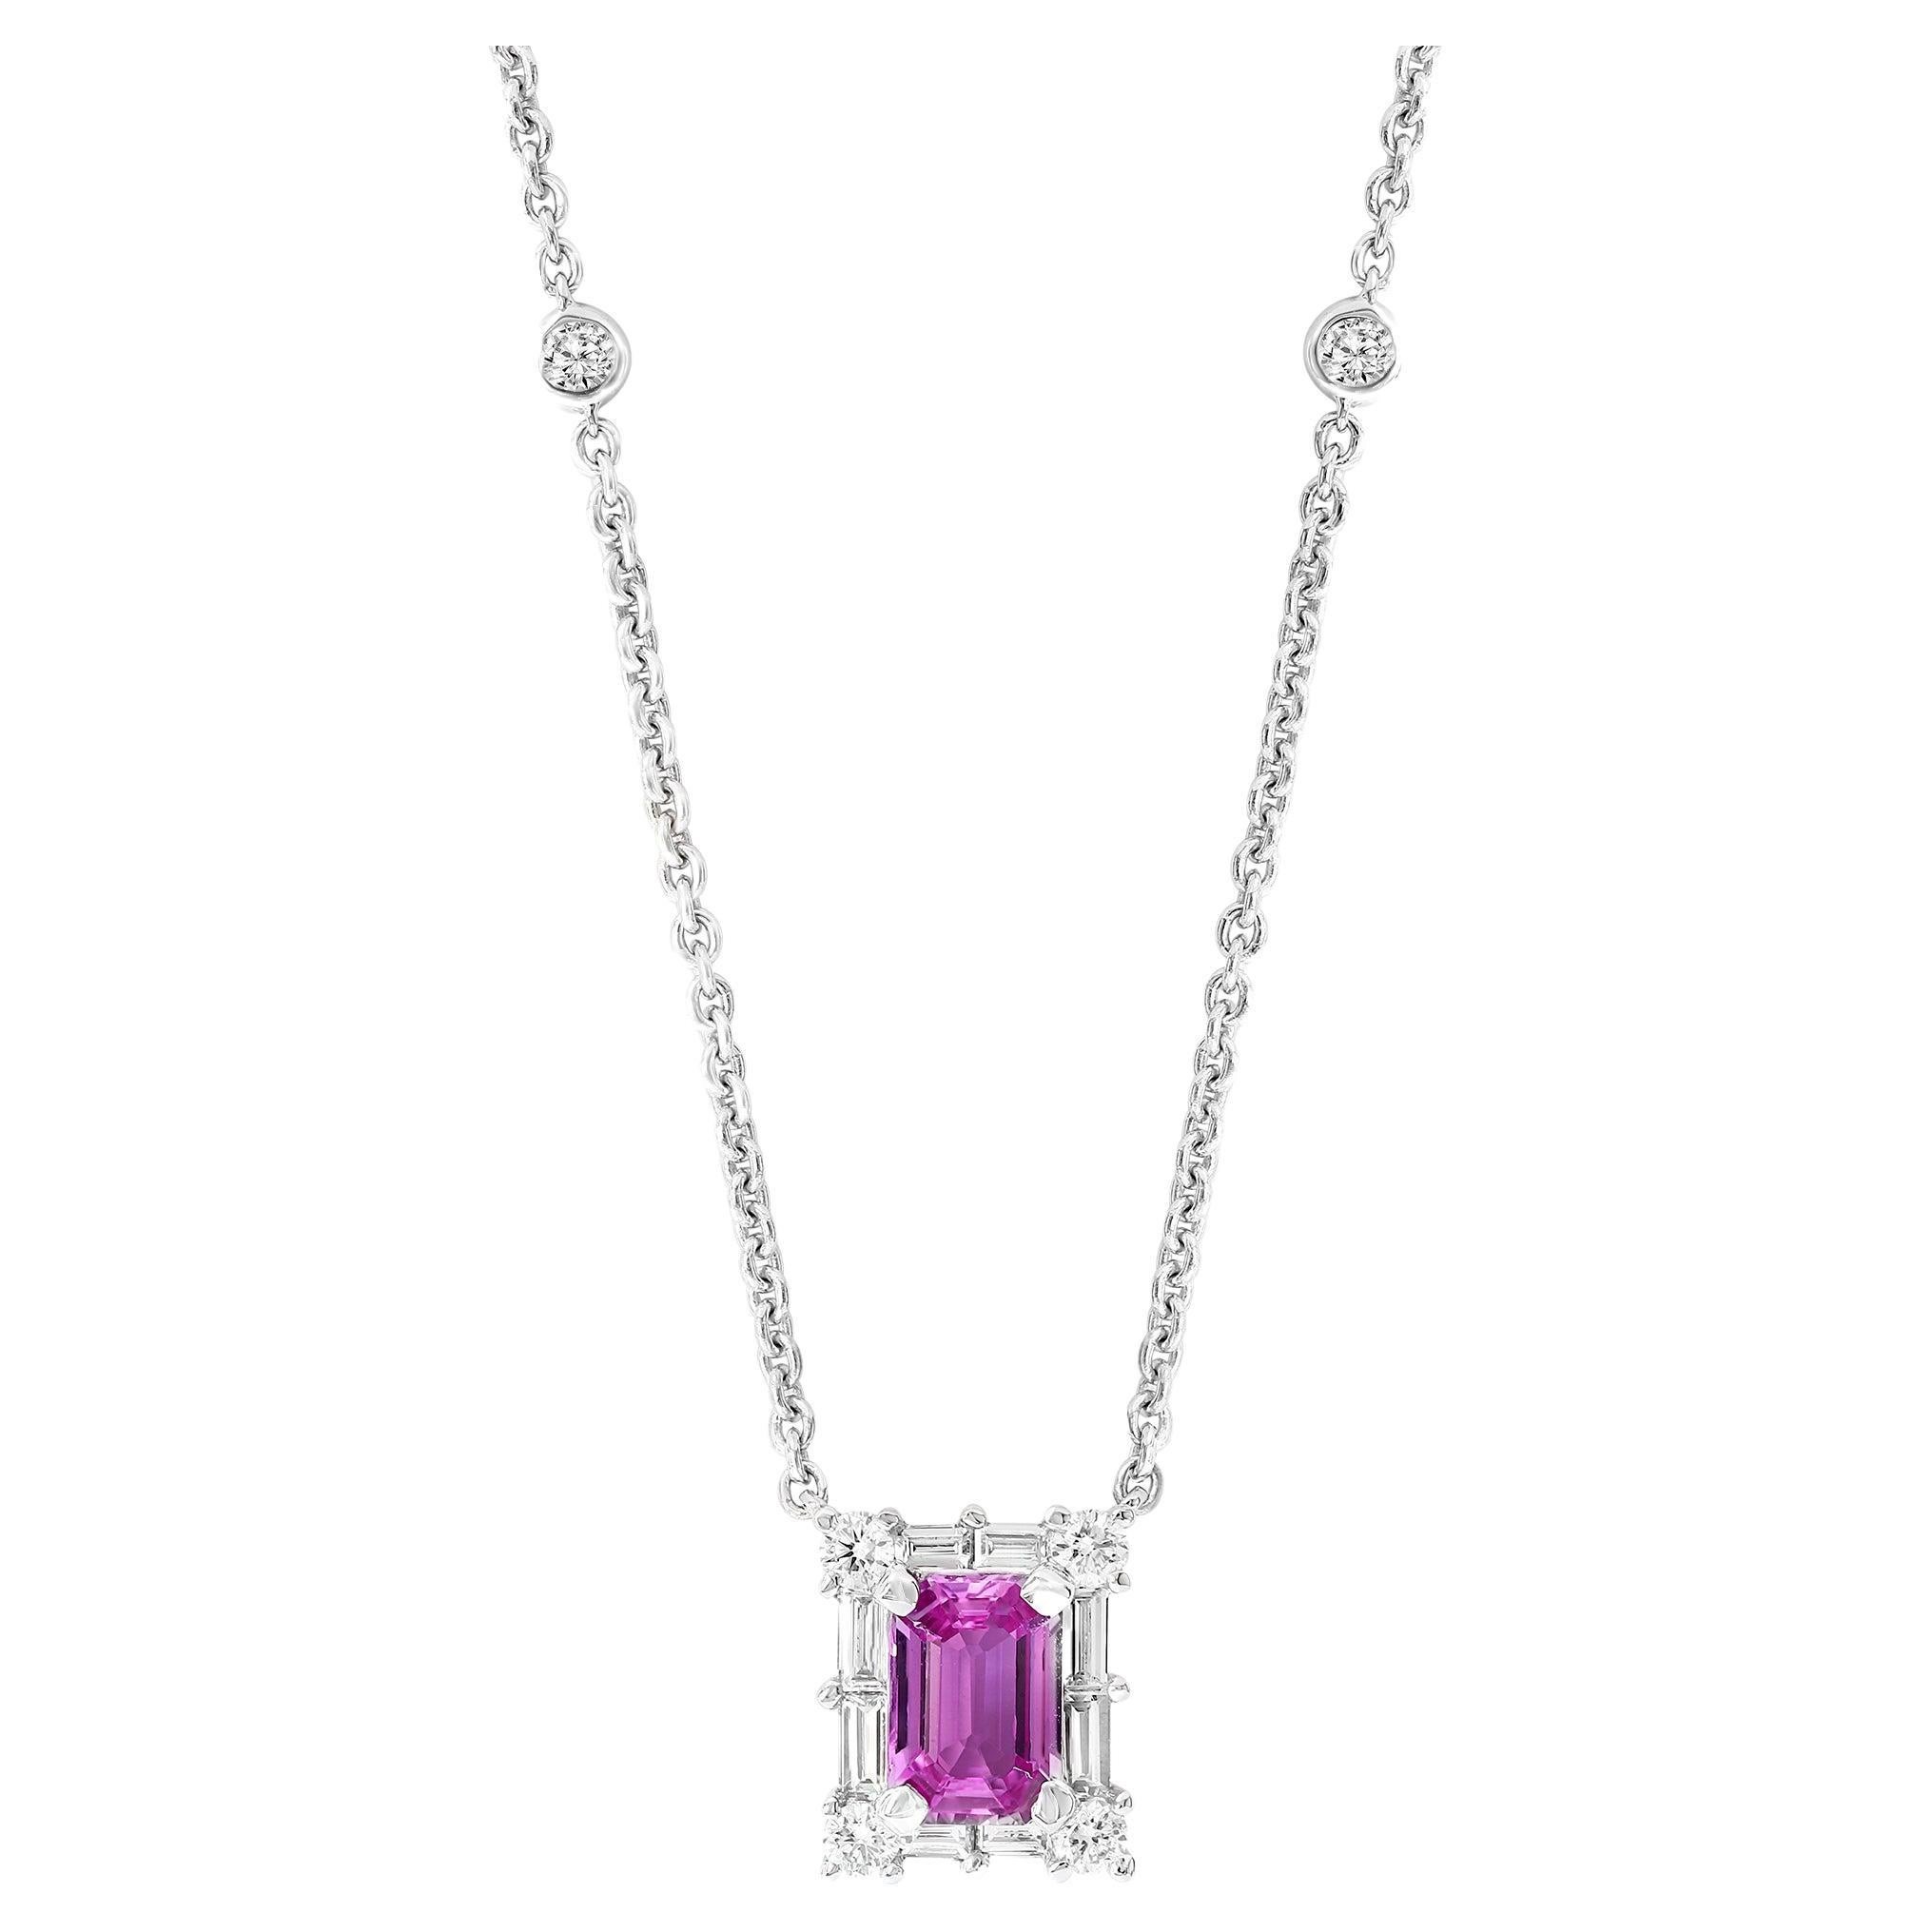 0.96 Carat Emerald Cut Pink Sapphire Diamond Pendant Necklace in 18K White Gold For Sale